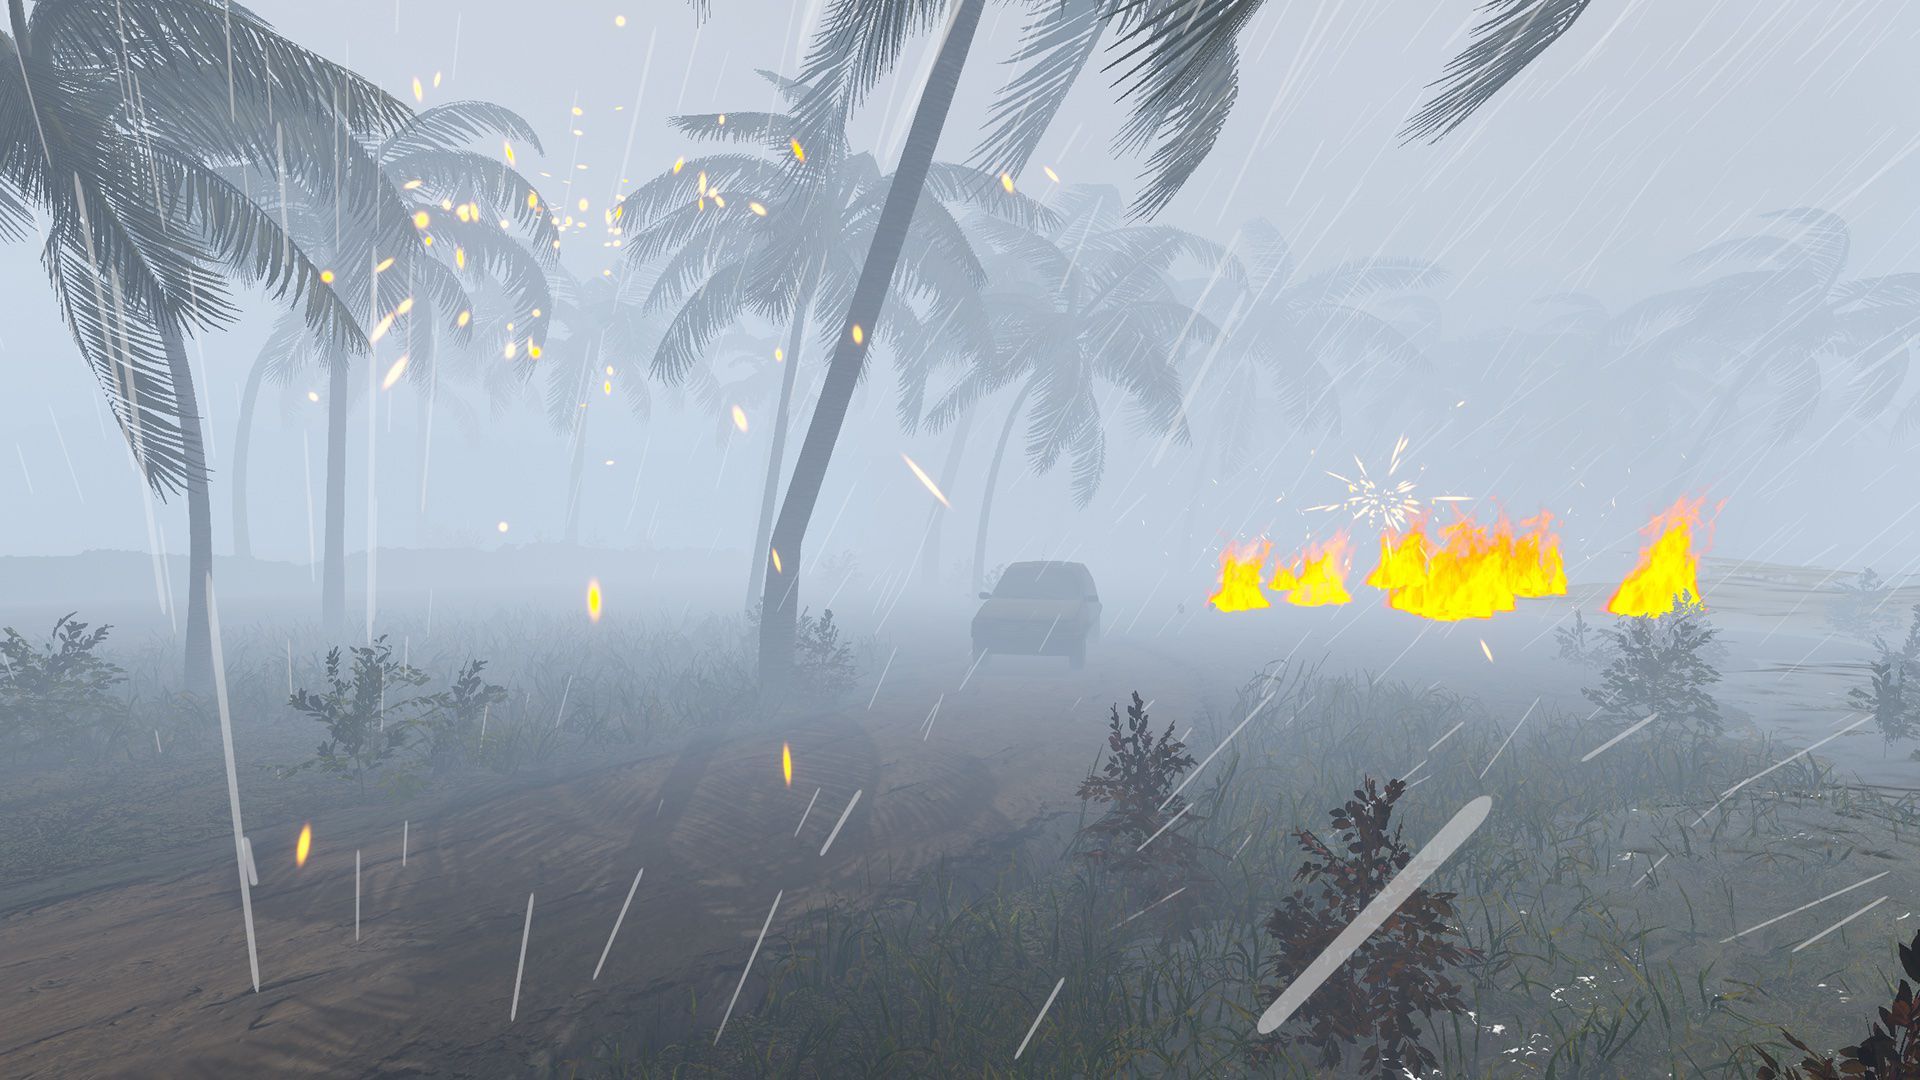 A storm strikes Samoa in "Shifting Homes."